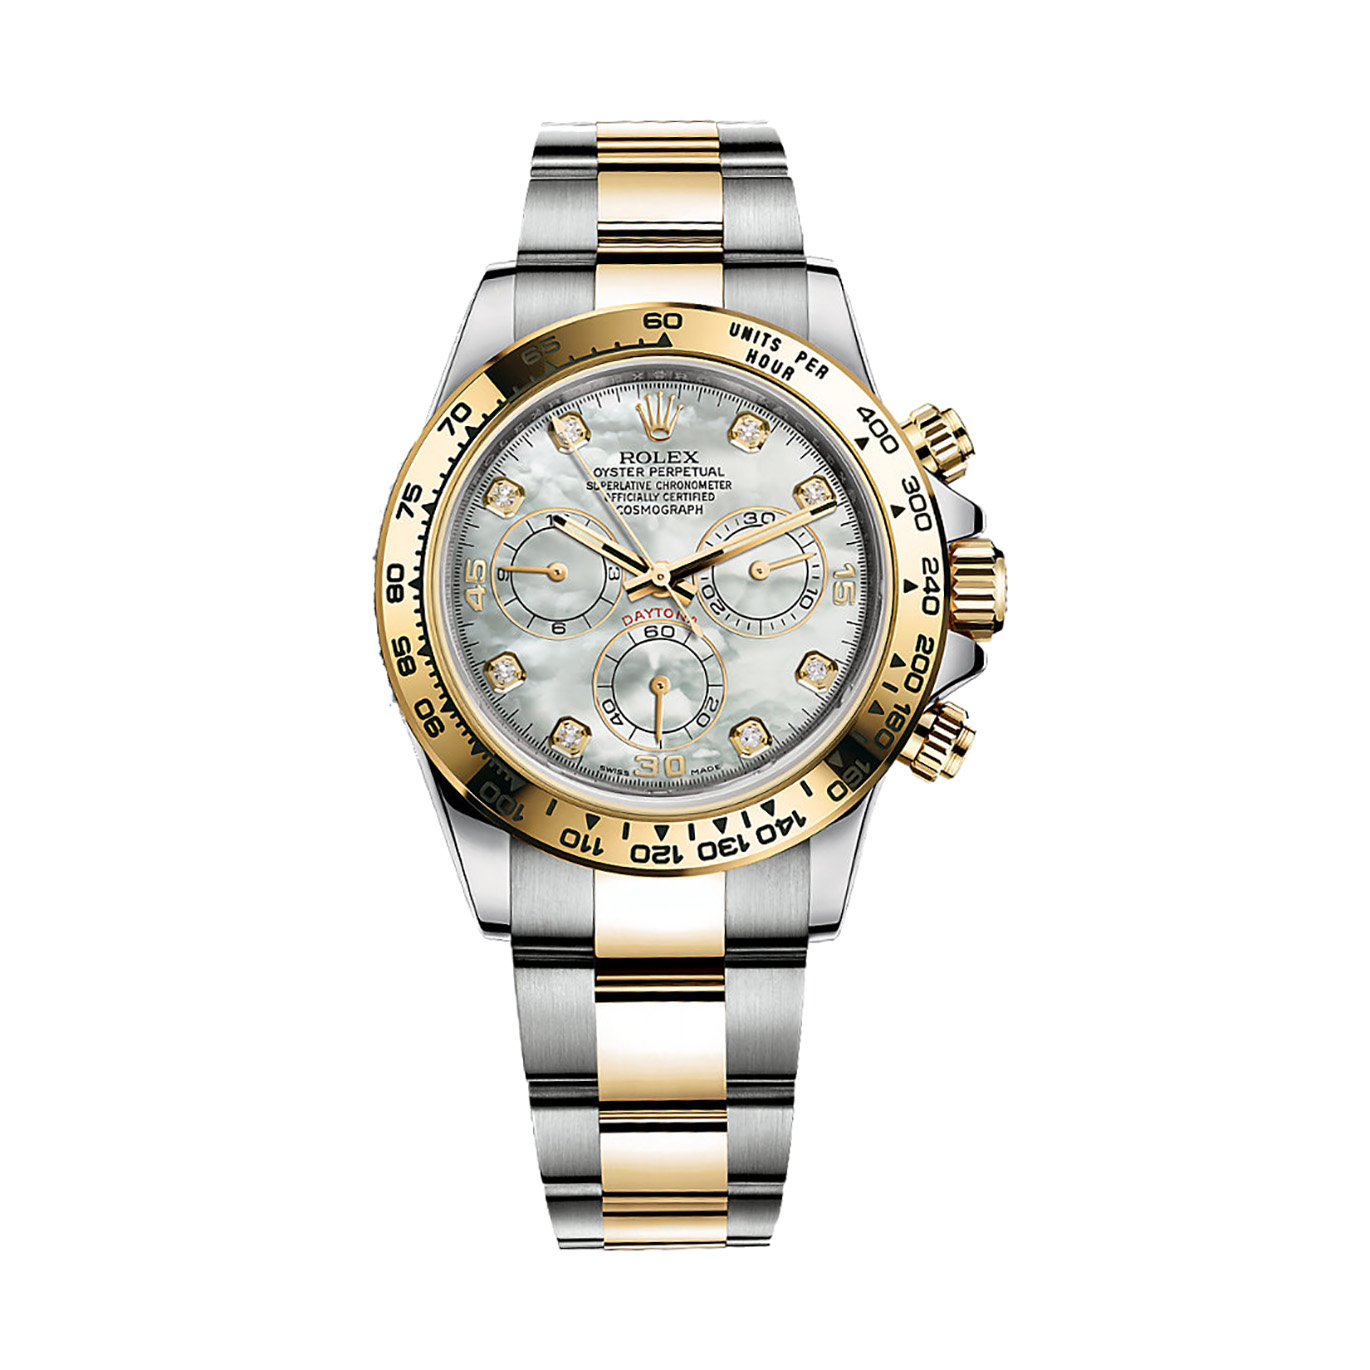 Cosmograph Daytona 116503 Gold & Stainless Steel Watch (White Mother-Of-Pearl Set With Diamonds)